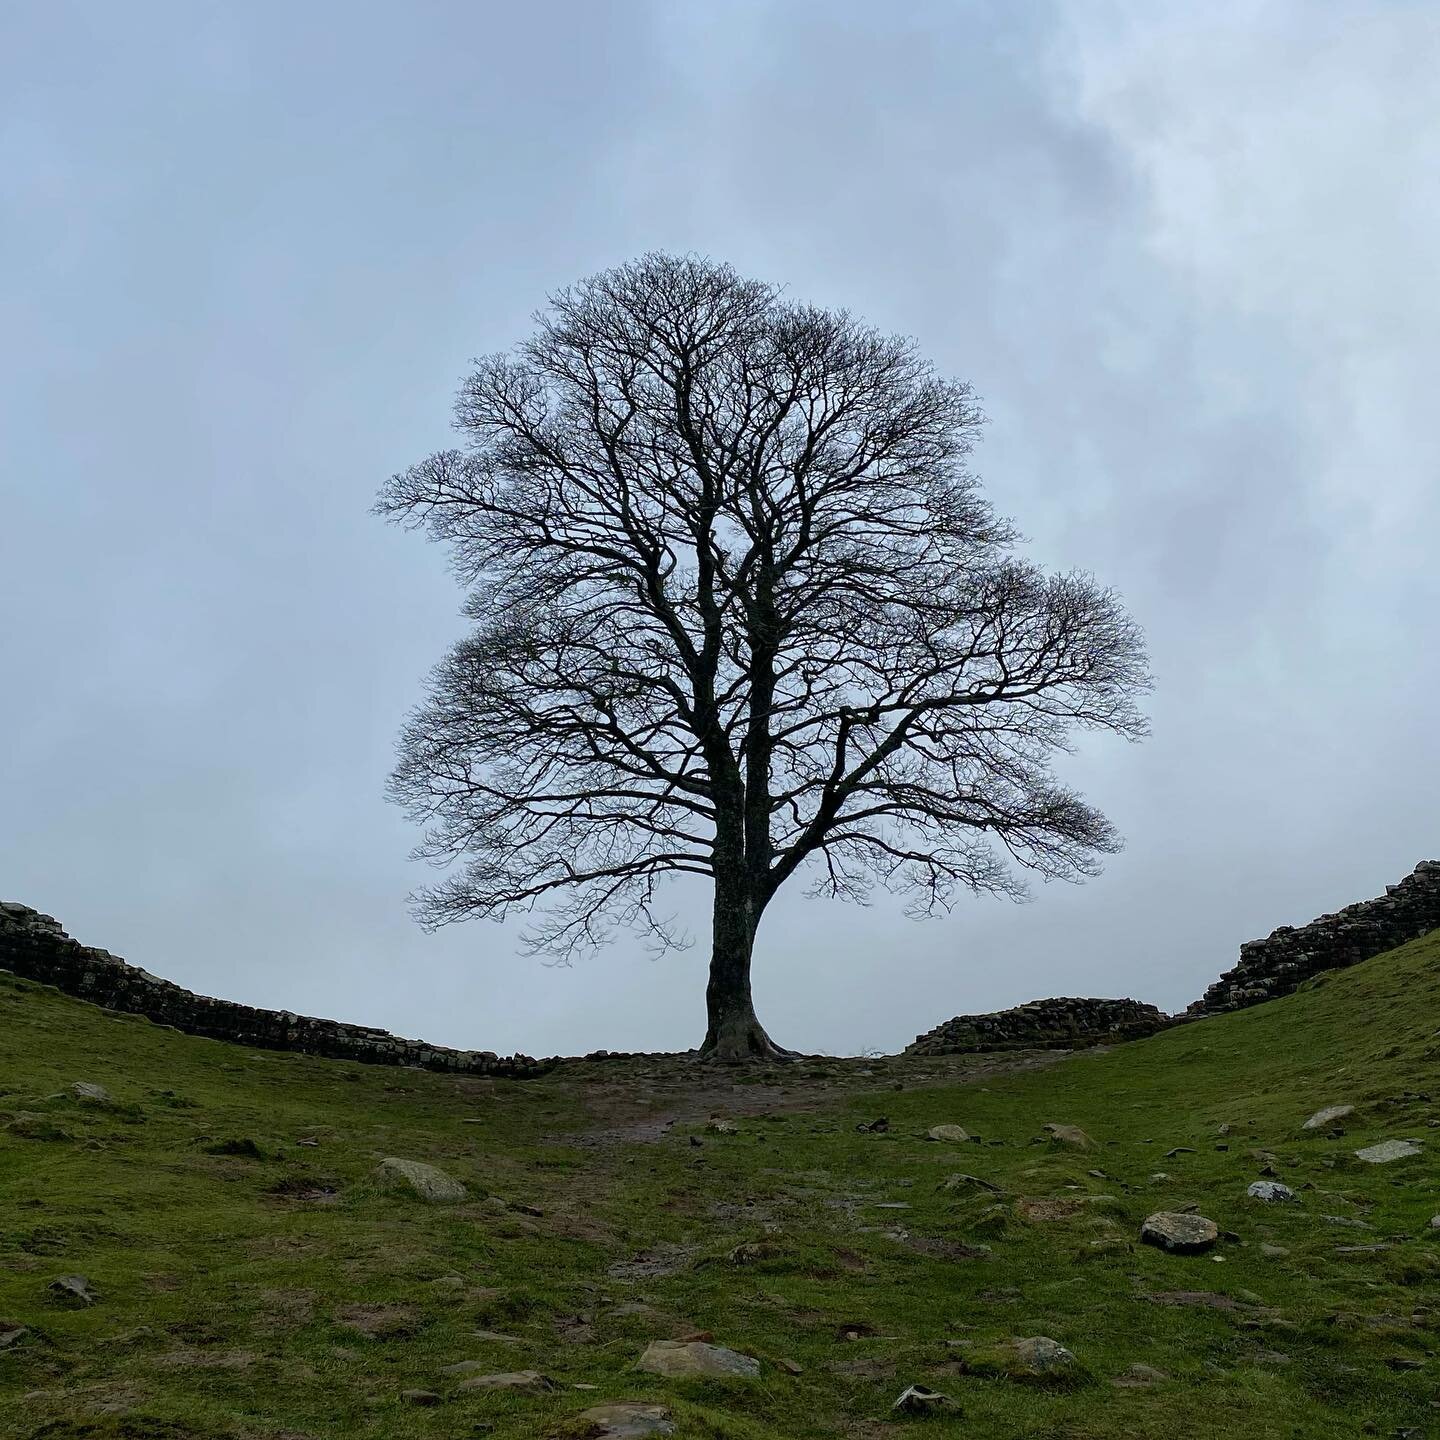 Is this the most photographed Sycamore tree in the UK? Sycamore gap on Hadrians wall. Blowing an absolute gale here today. #hadrianswall #weekendbreak #scottishfurnituremakersassociation